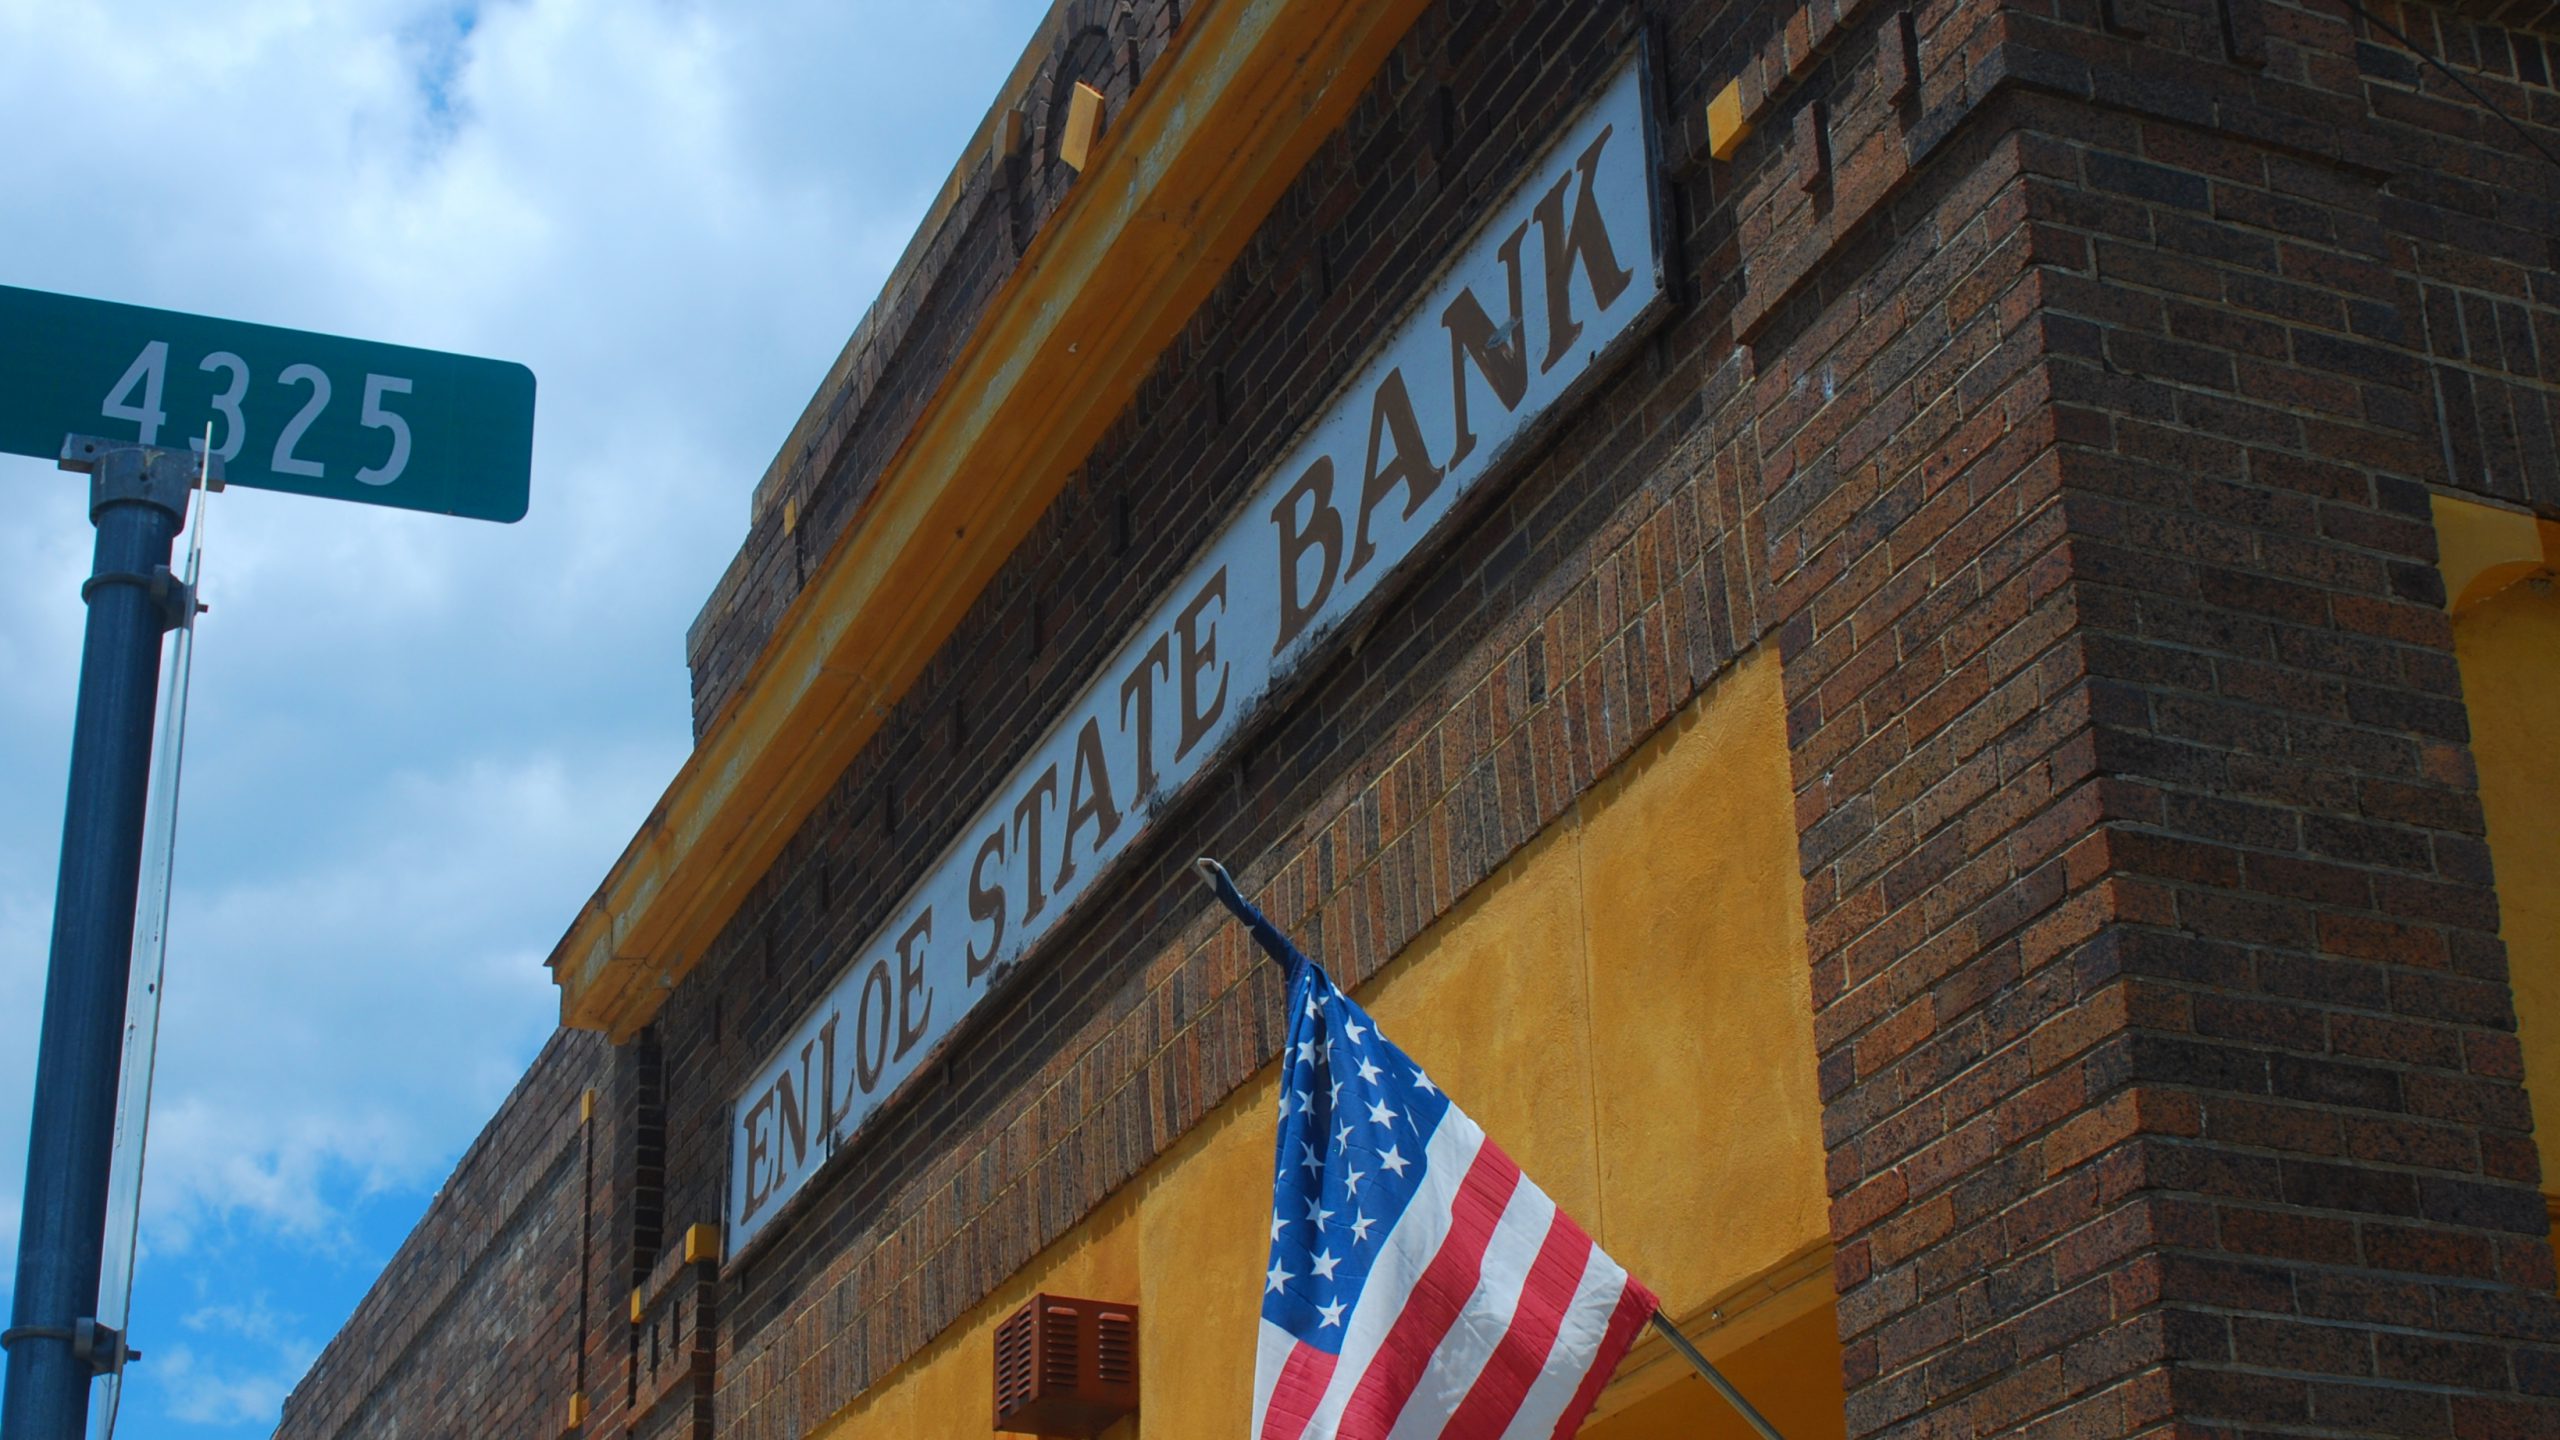 bank building with old sign